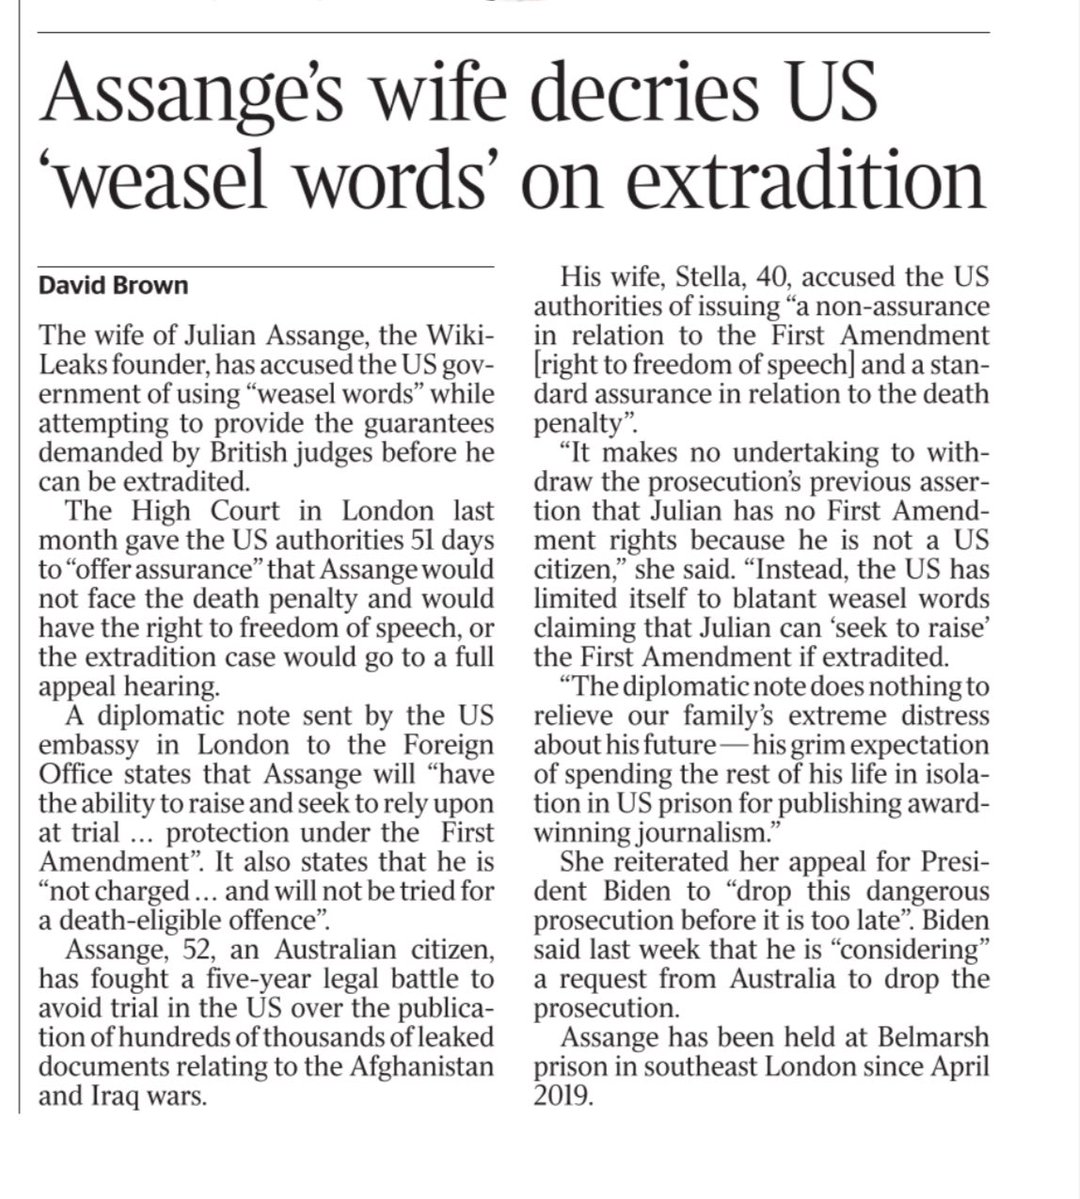 ‘Assange’s wife decries US ‘weasel words’ on extradition’ | @thetimes #LetHimGoJoe #FreeAssangeNOW